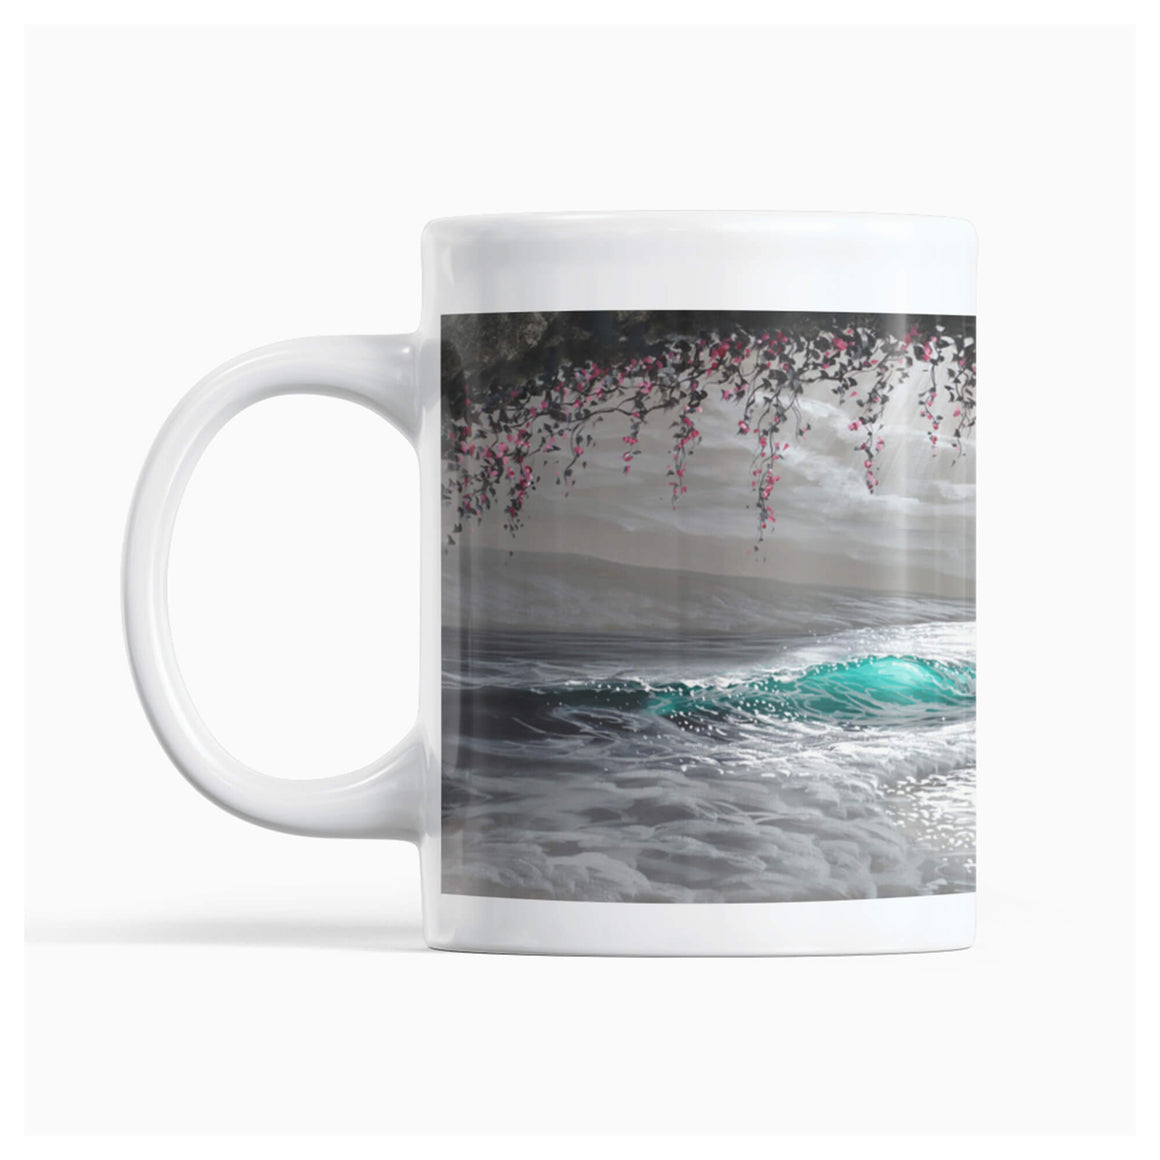 Ceramic mug featuring a wave seen in a cove with a unique color scheme that is primarily black and white by Hawaii artist Walfrido Garcia